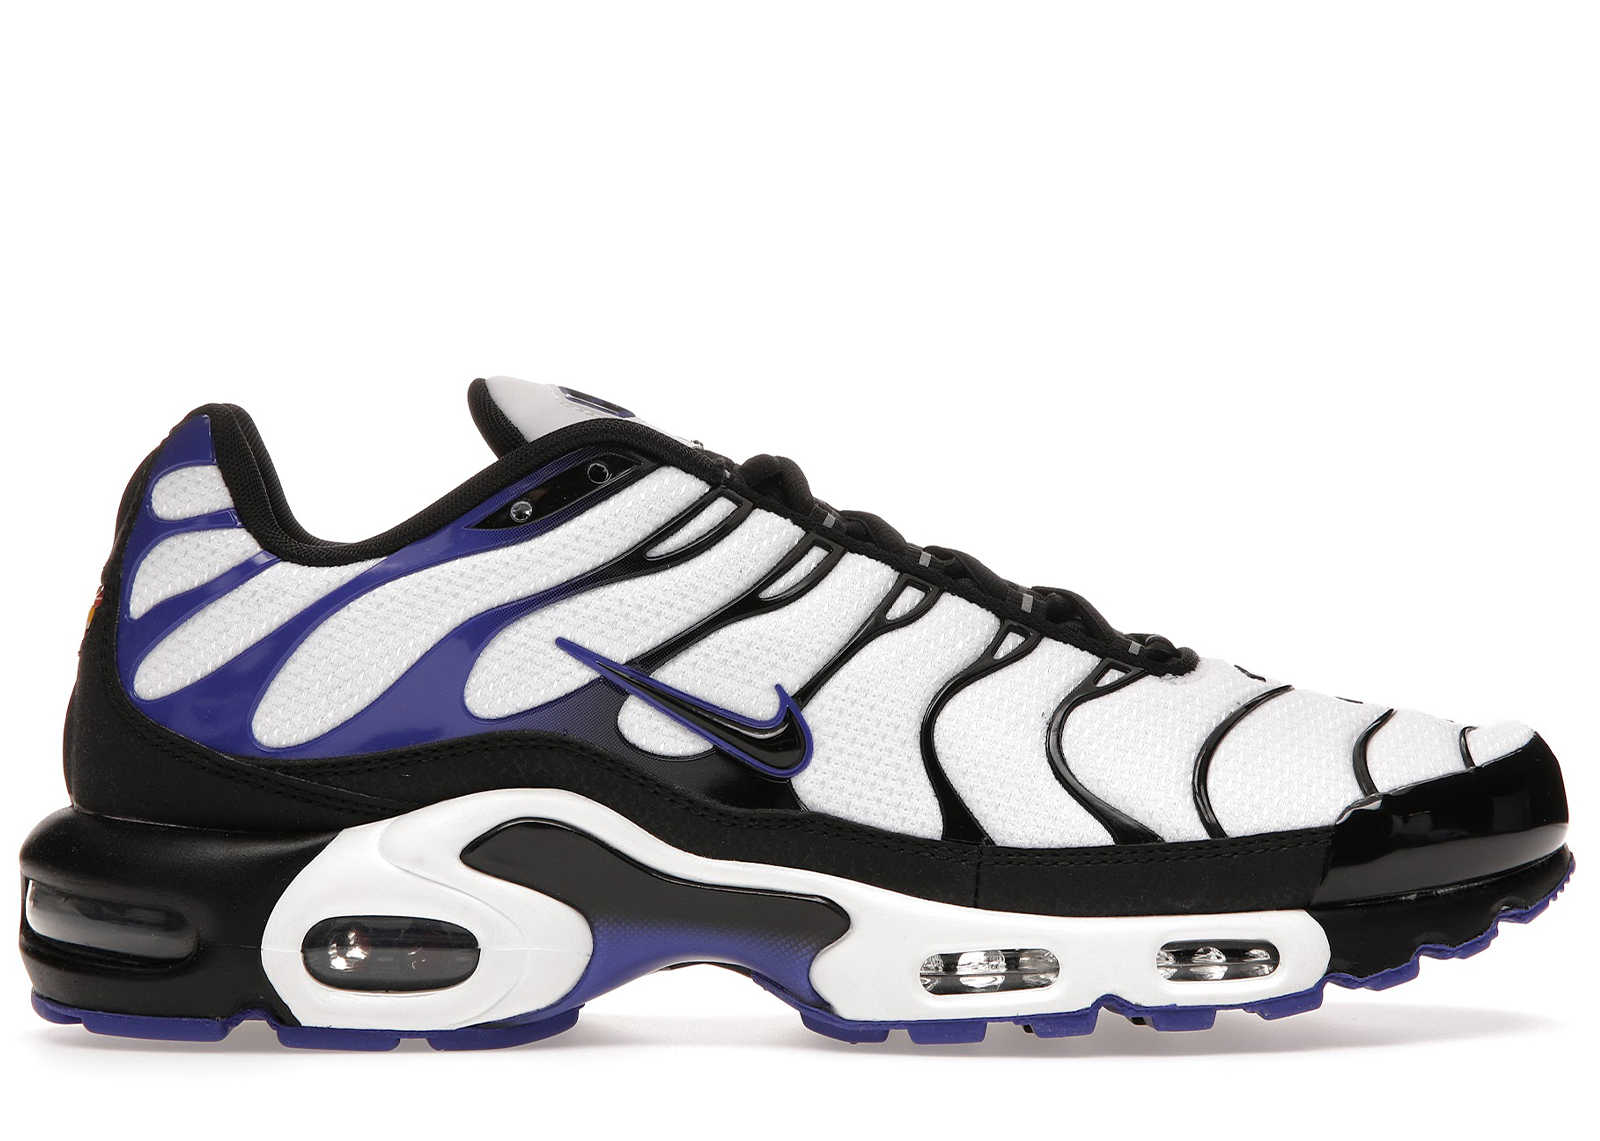 Buy Nike Air Max Plus Shoes & Deadstock Sneakers لانجريات